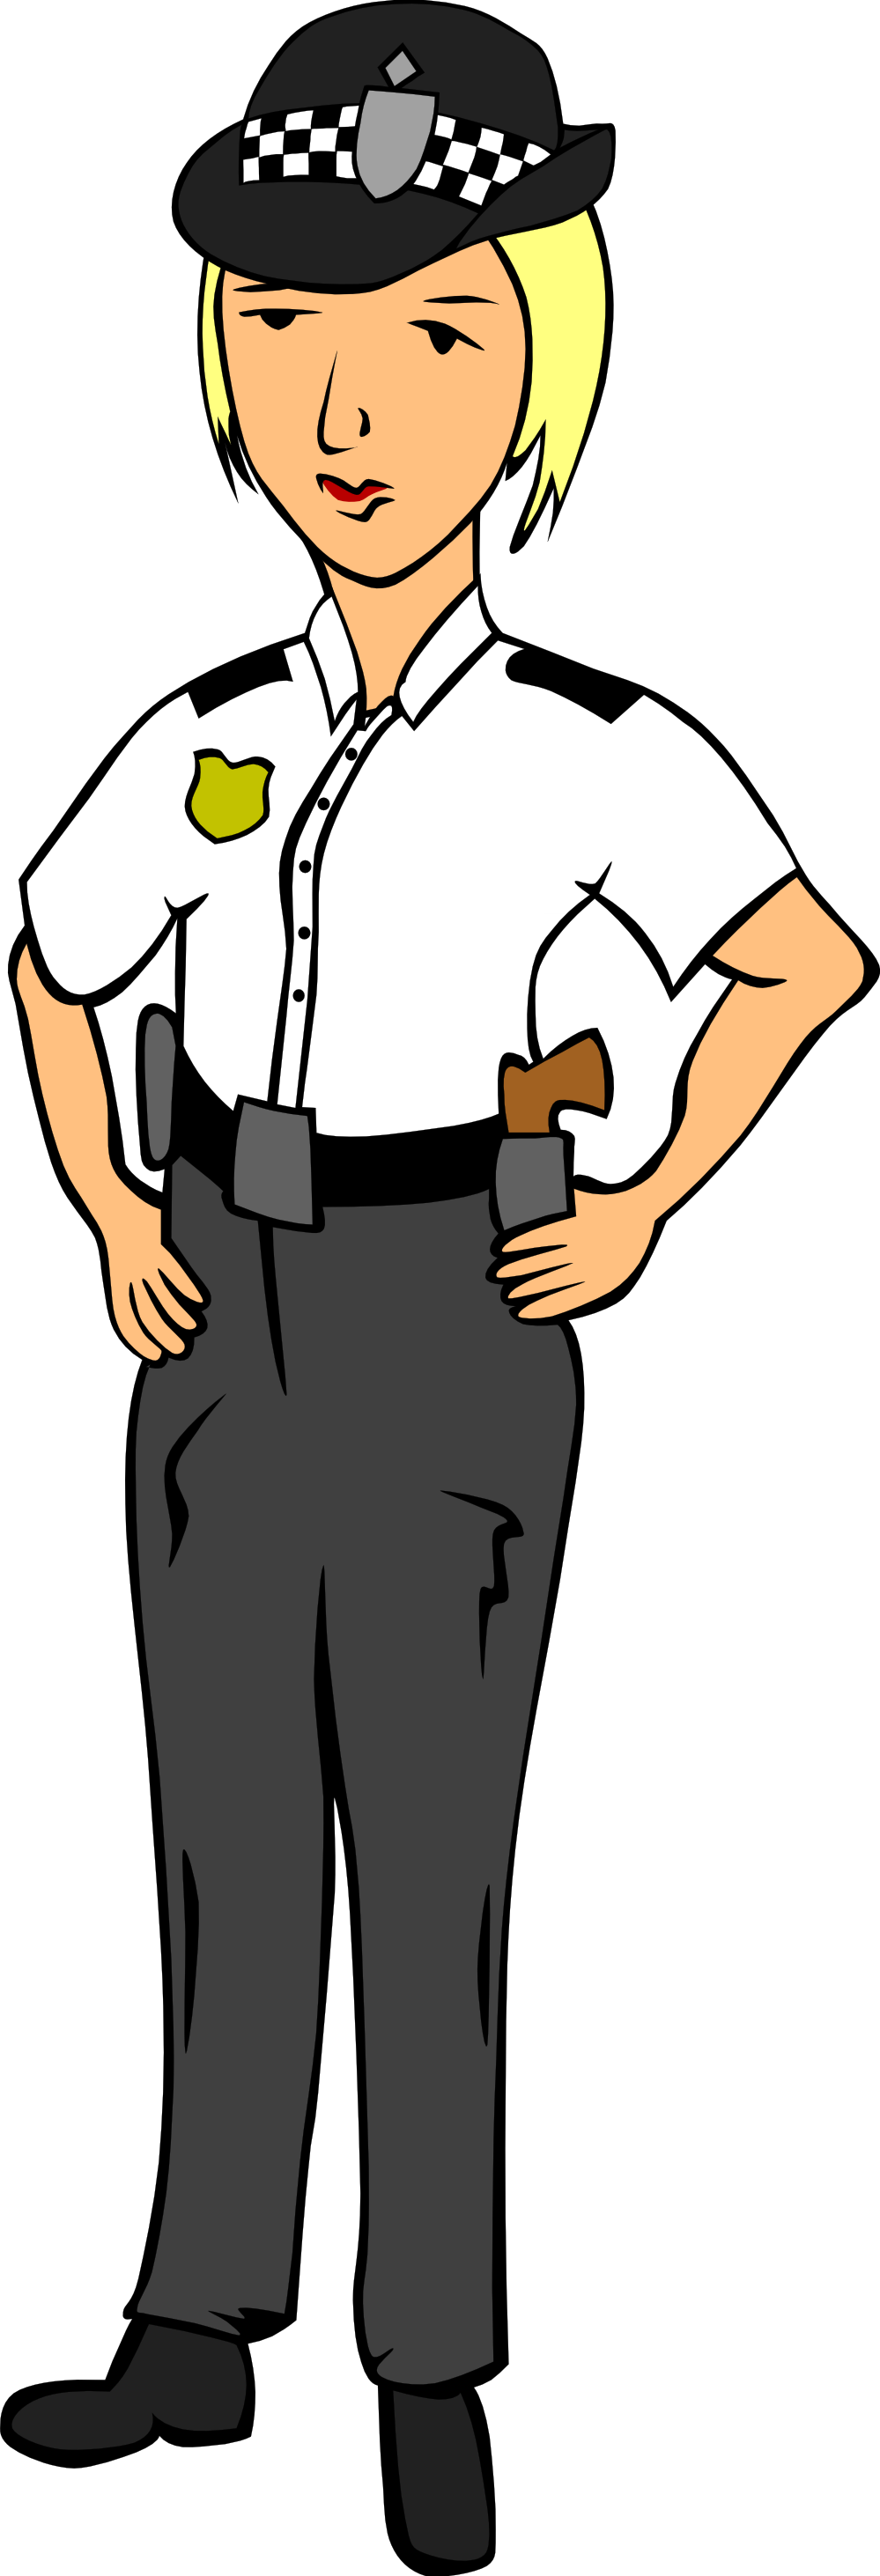 Police officer clipart clipart